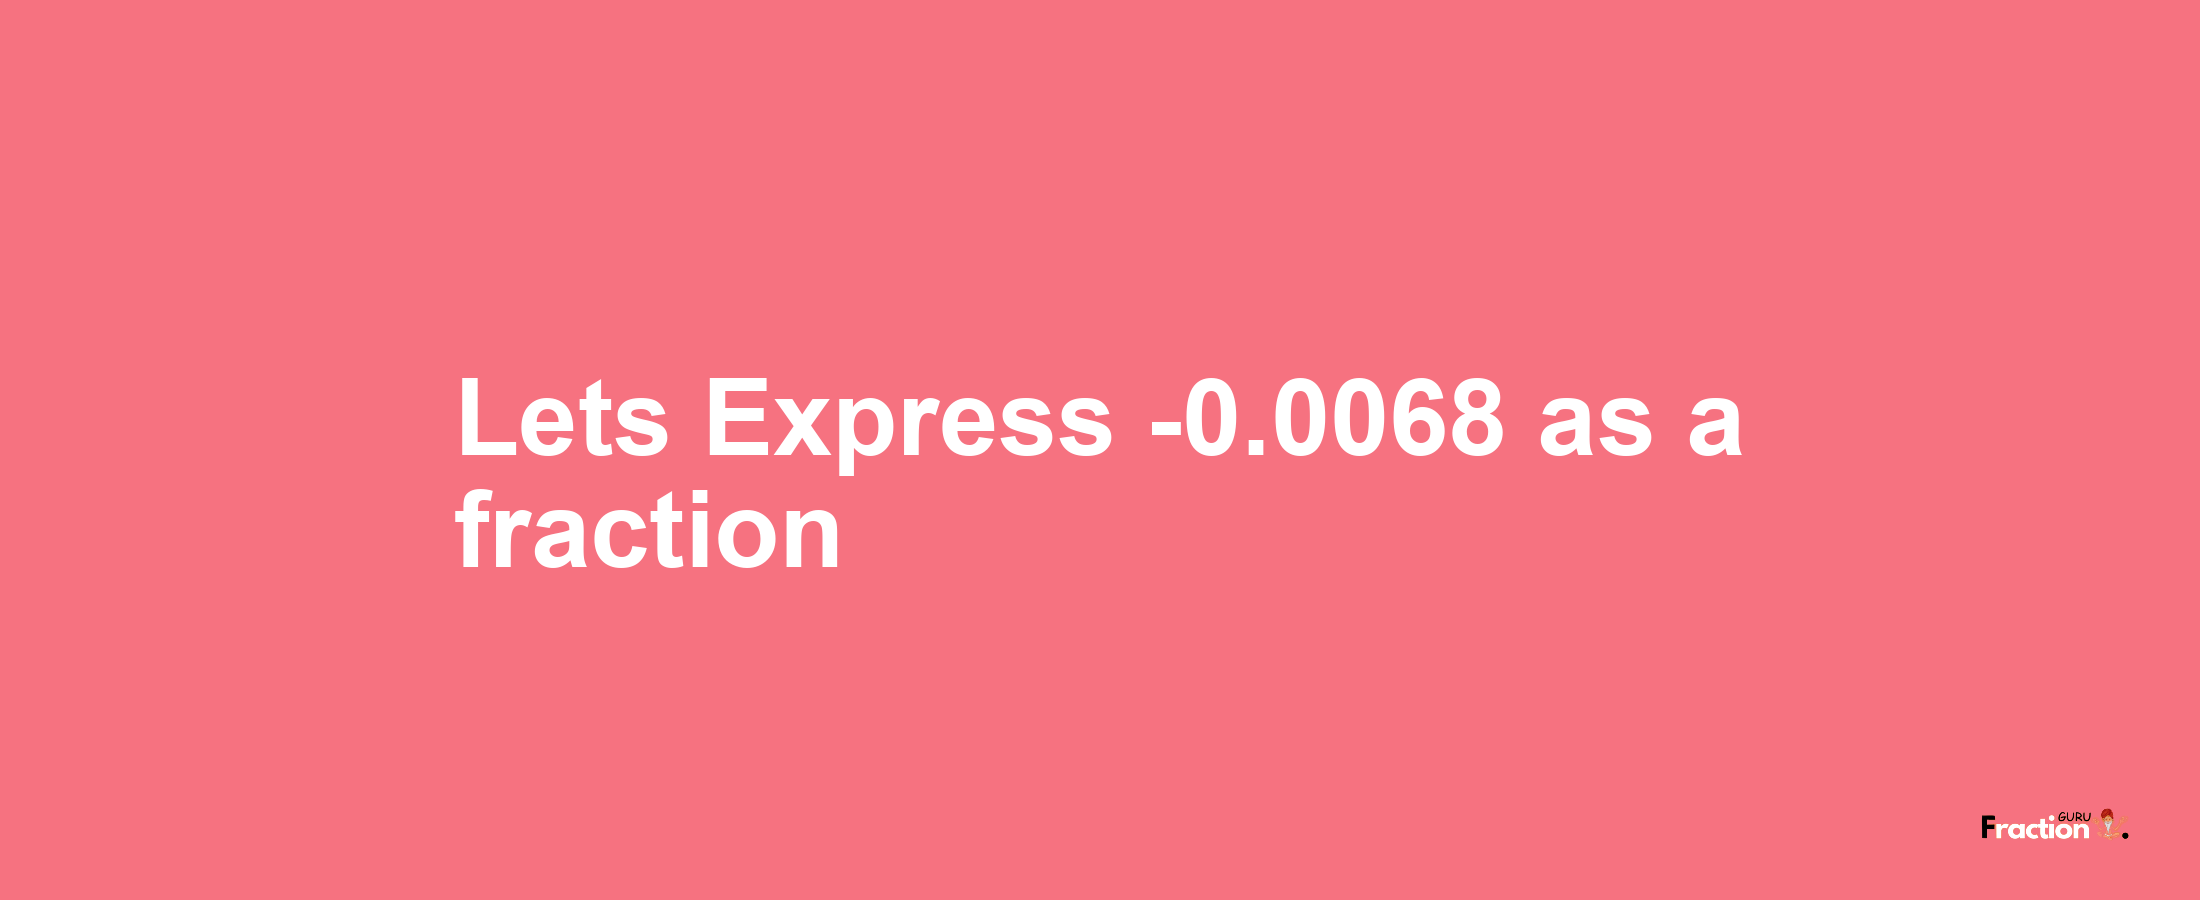 Lets Express -0.0068 as afraction